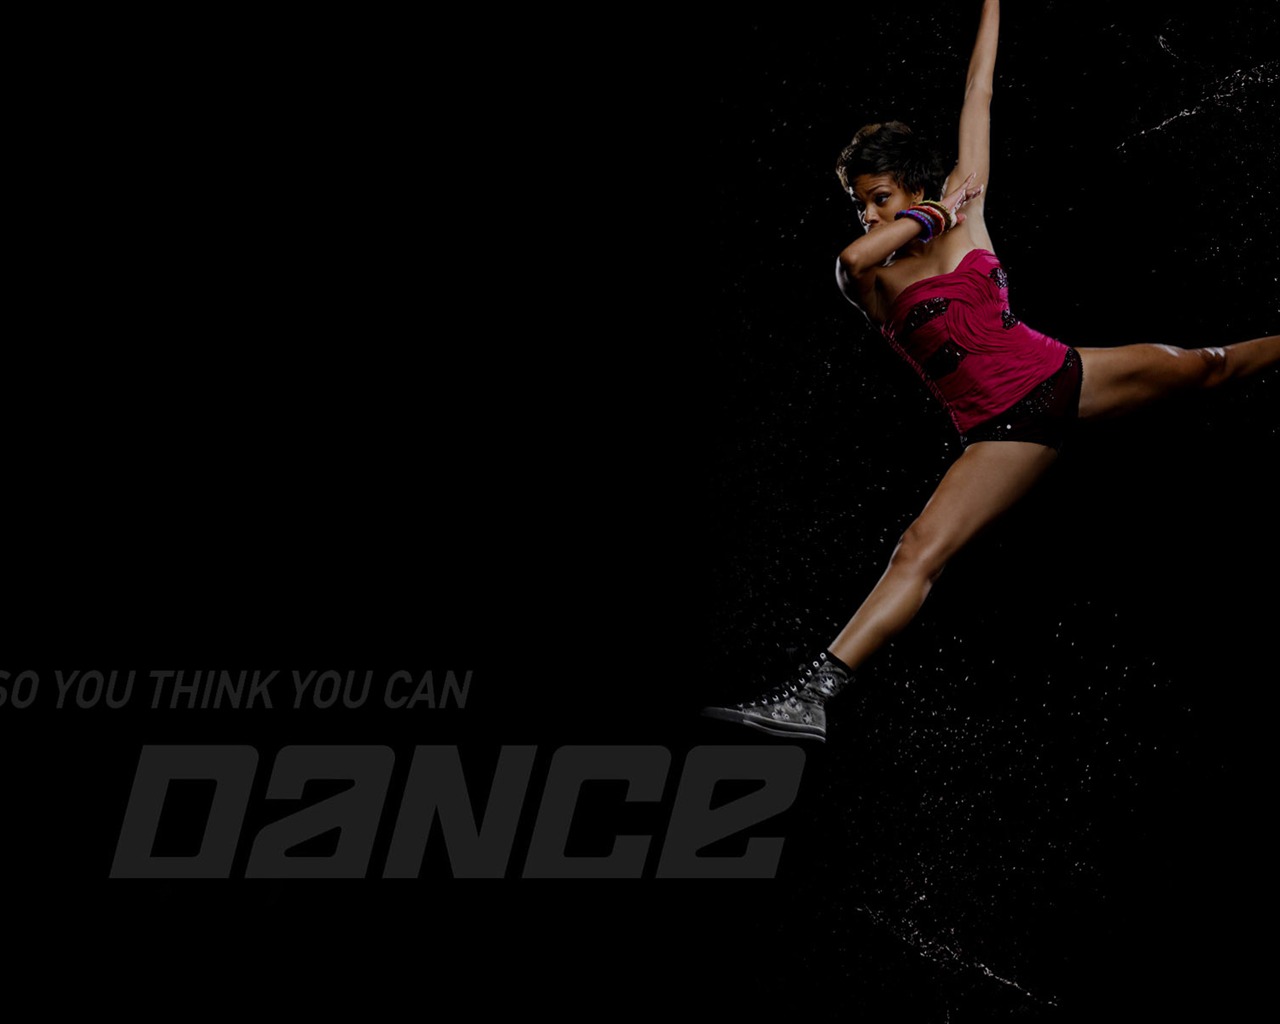 So You Think You Can Dance 舞林爭霸壁紙(二) #15 - 1280x1024